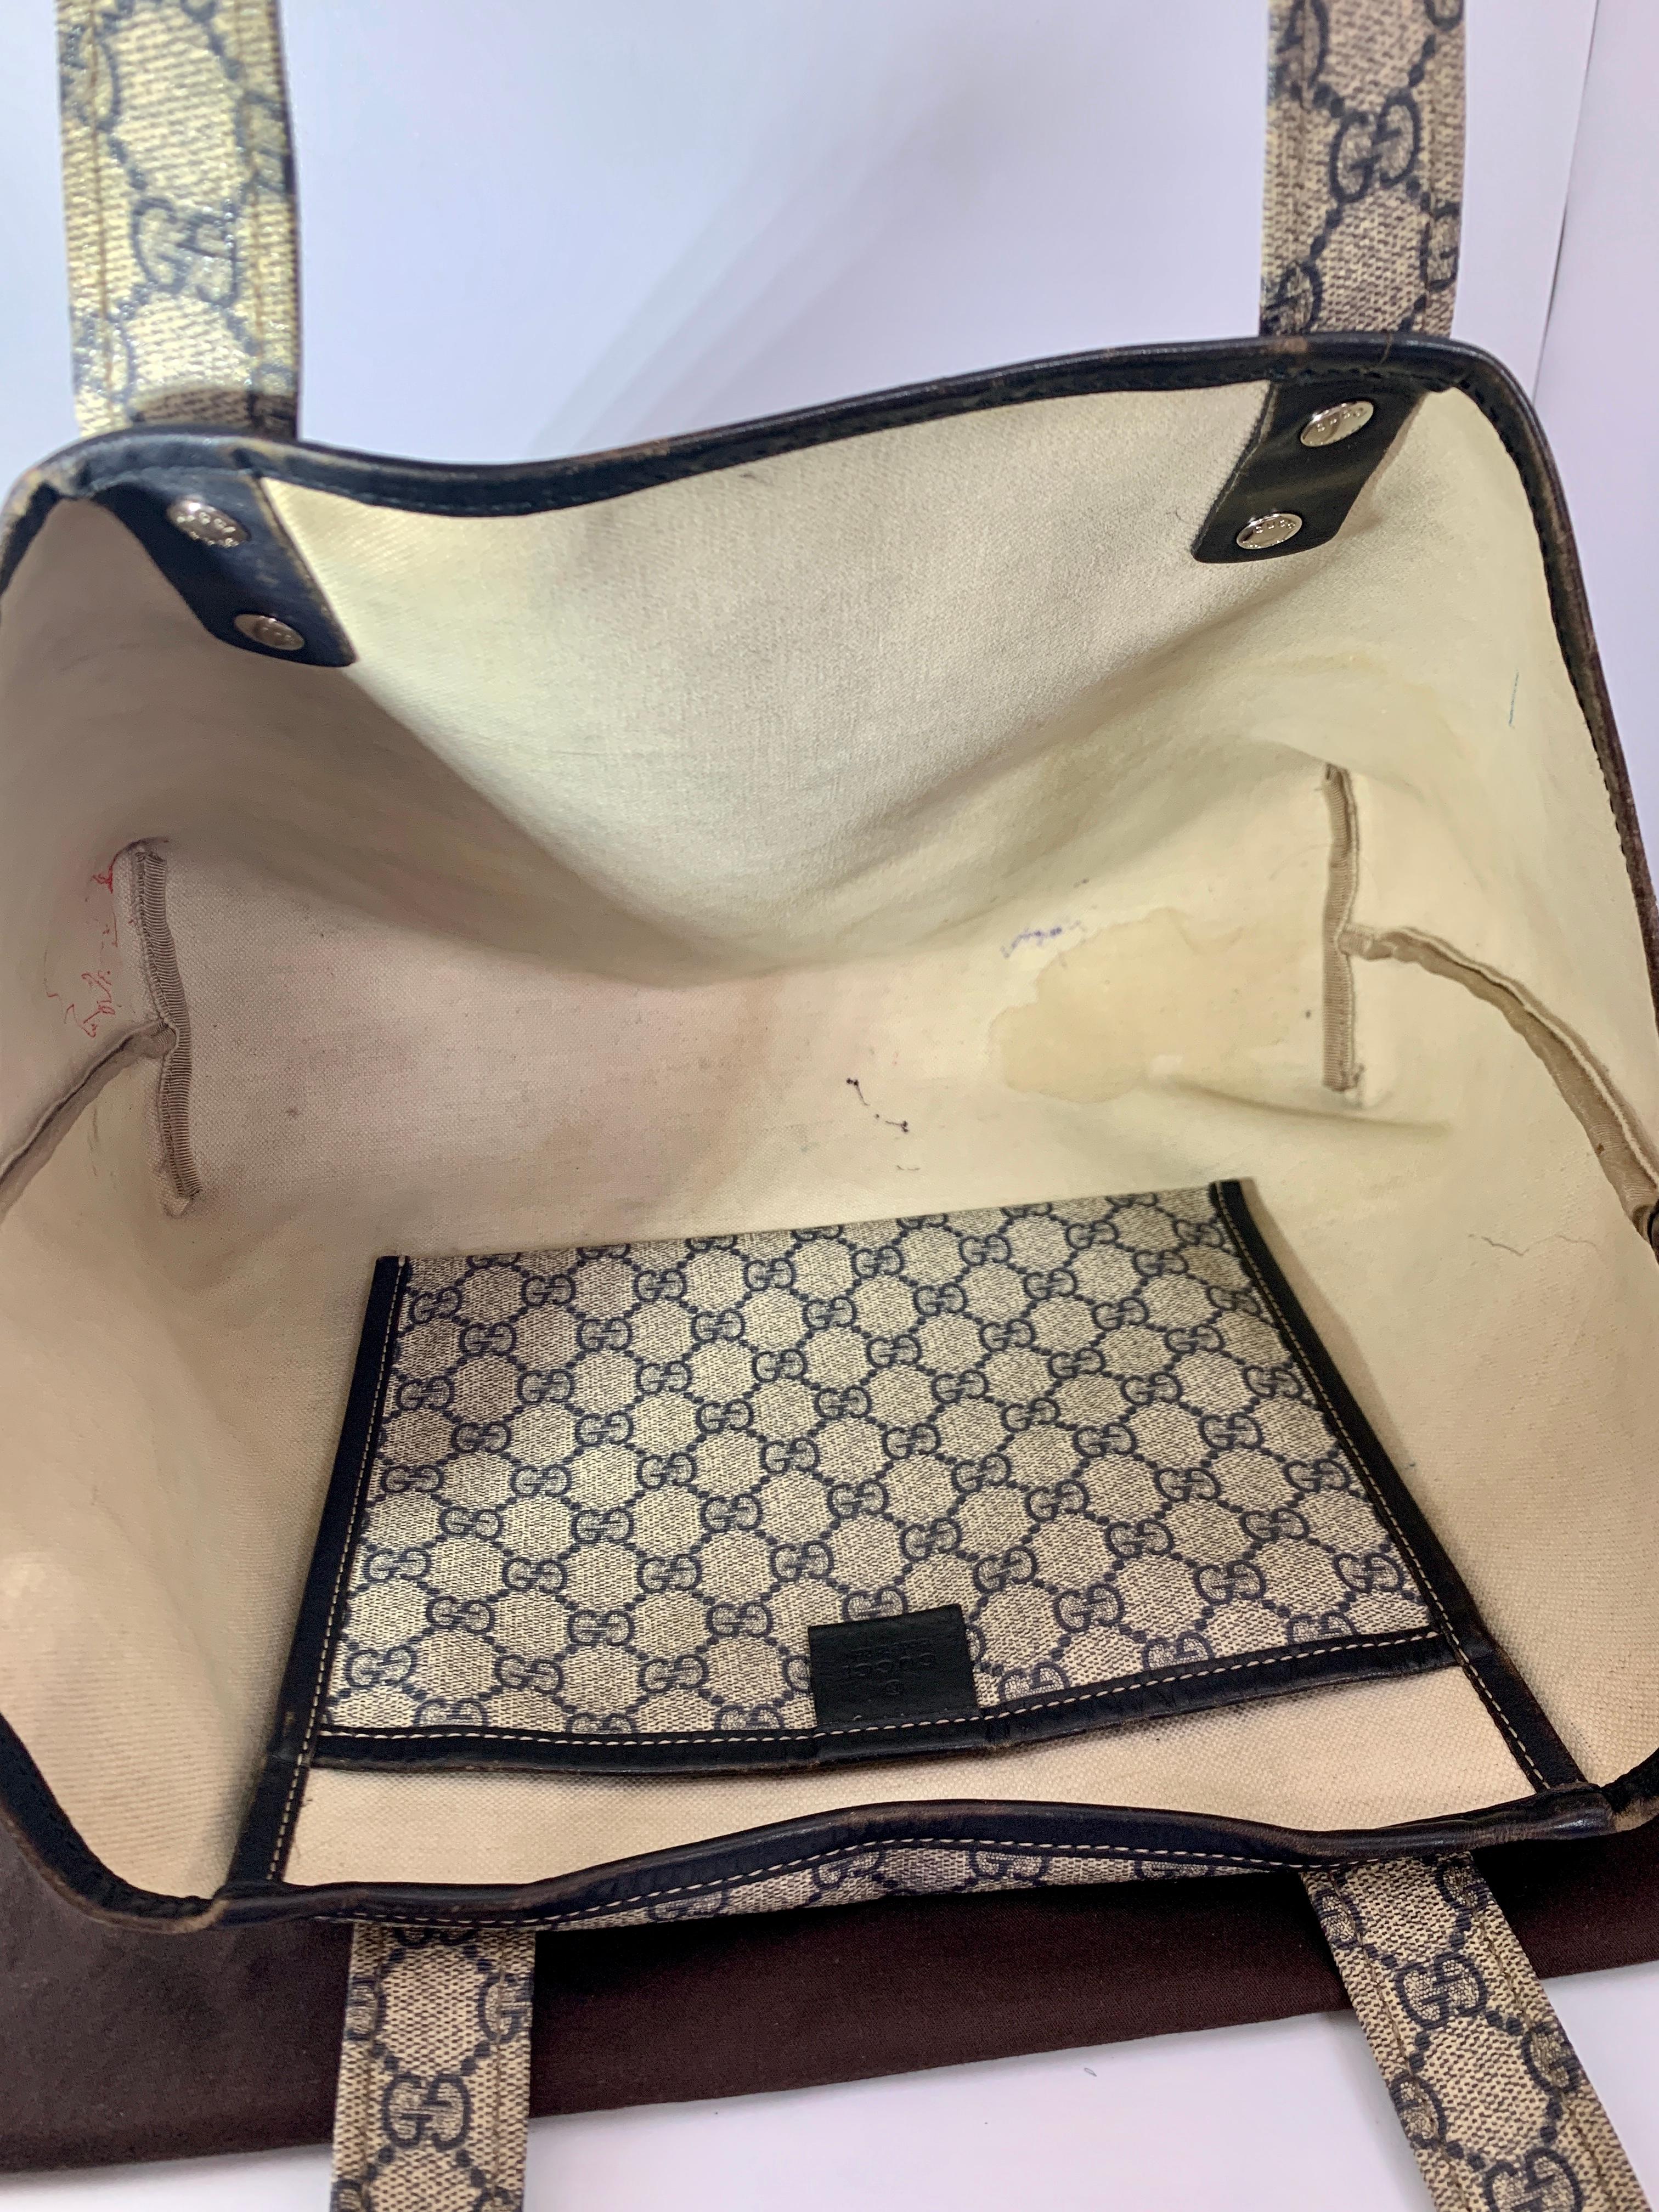 This is an authentic GUCCI Monogram Large Original Tote bag . This chic tote is crafted of traditional navy blue Gucci GG monogram PVC leather. . The top  opens to a spacious natural fabric interior with one large  hanging pocket .  This is an